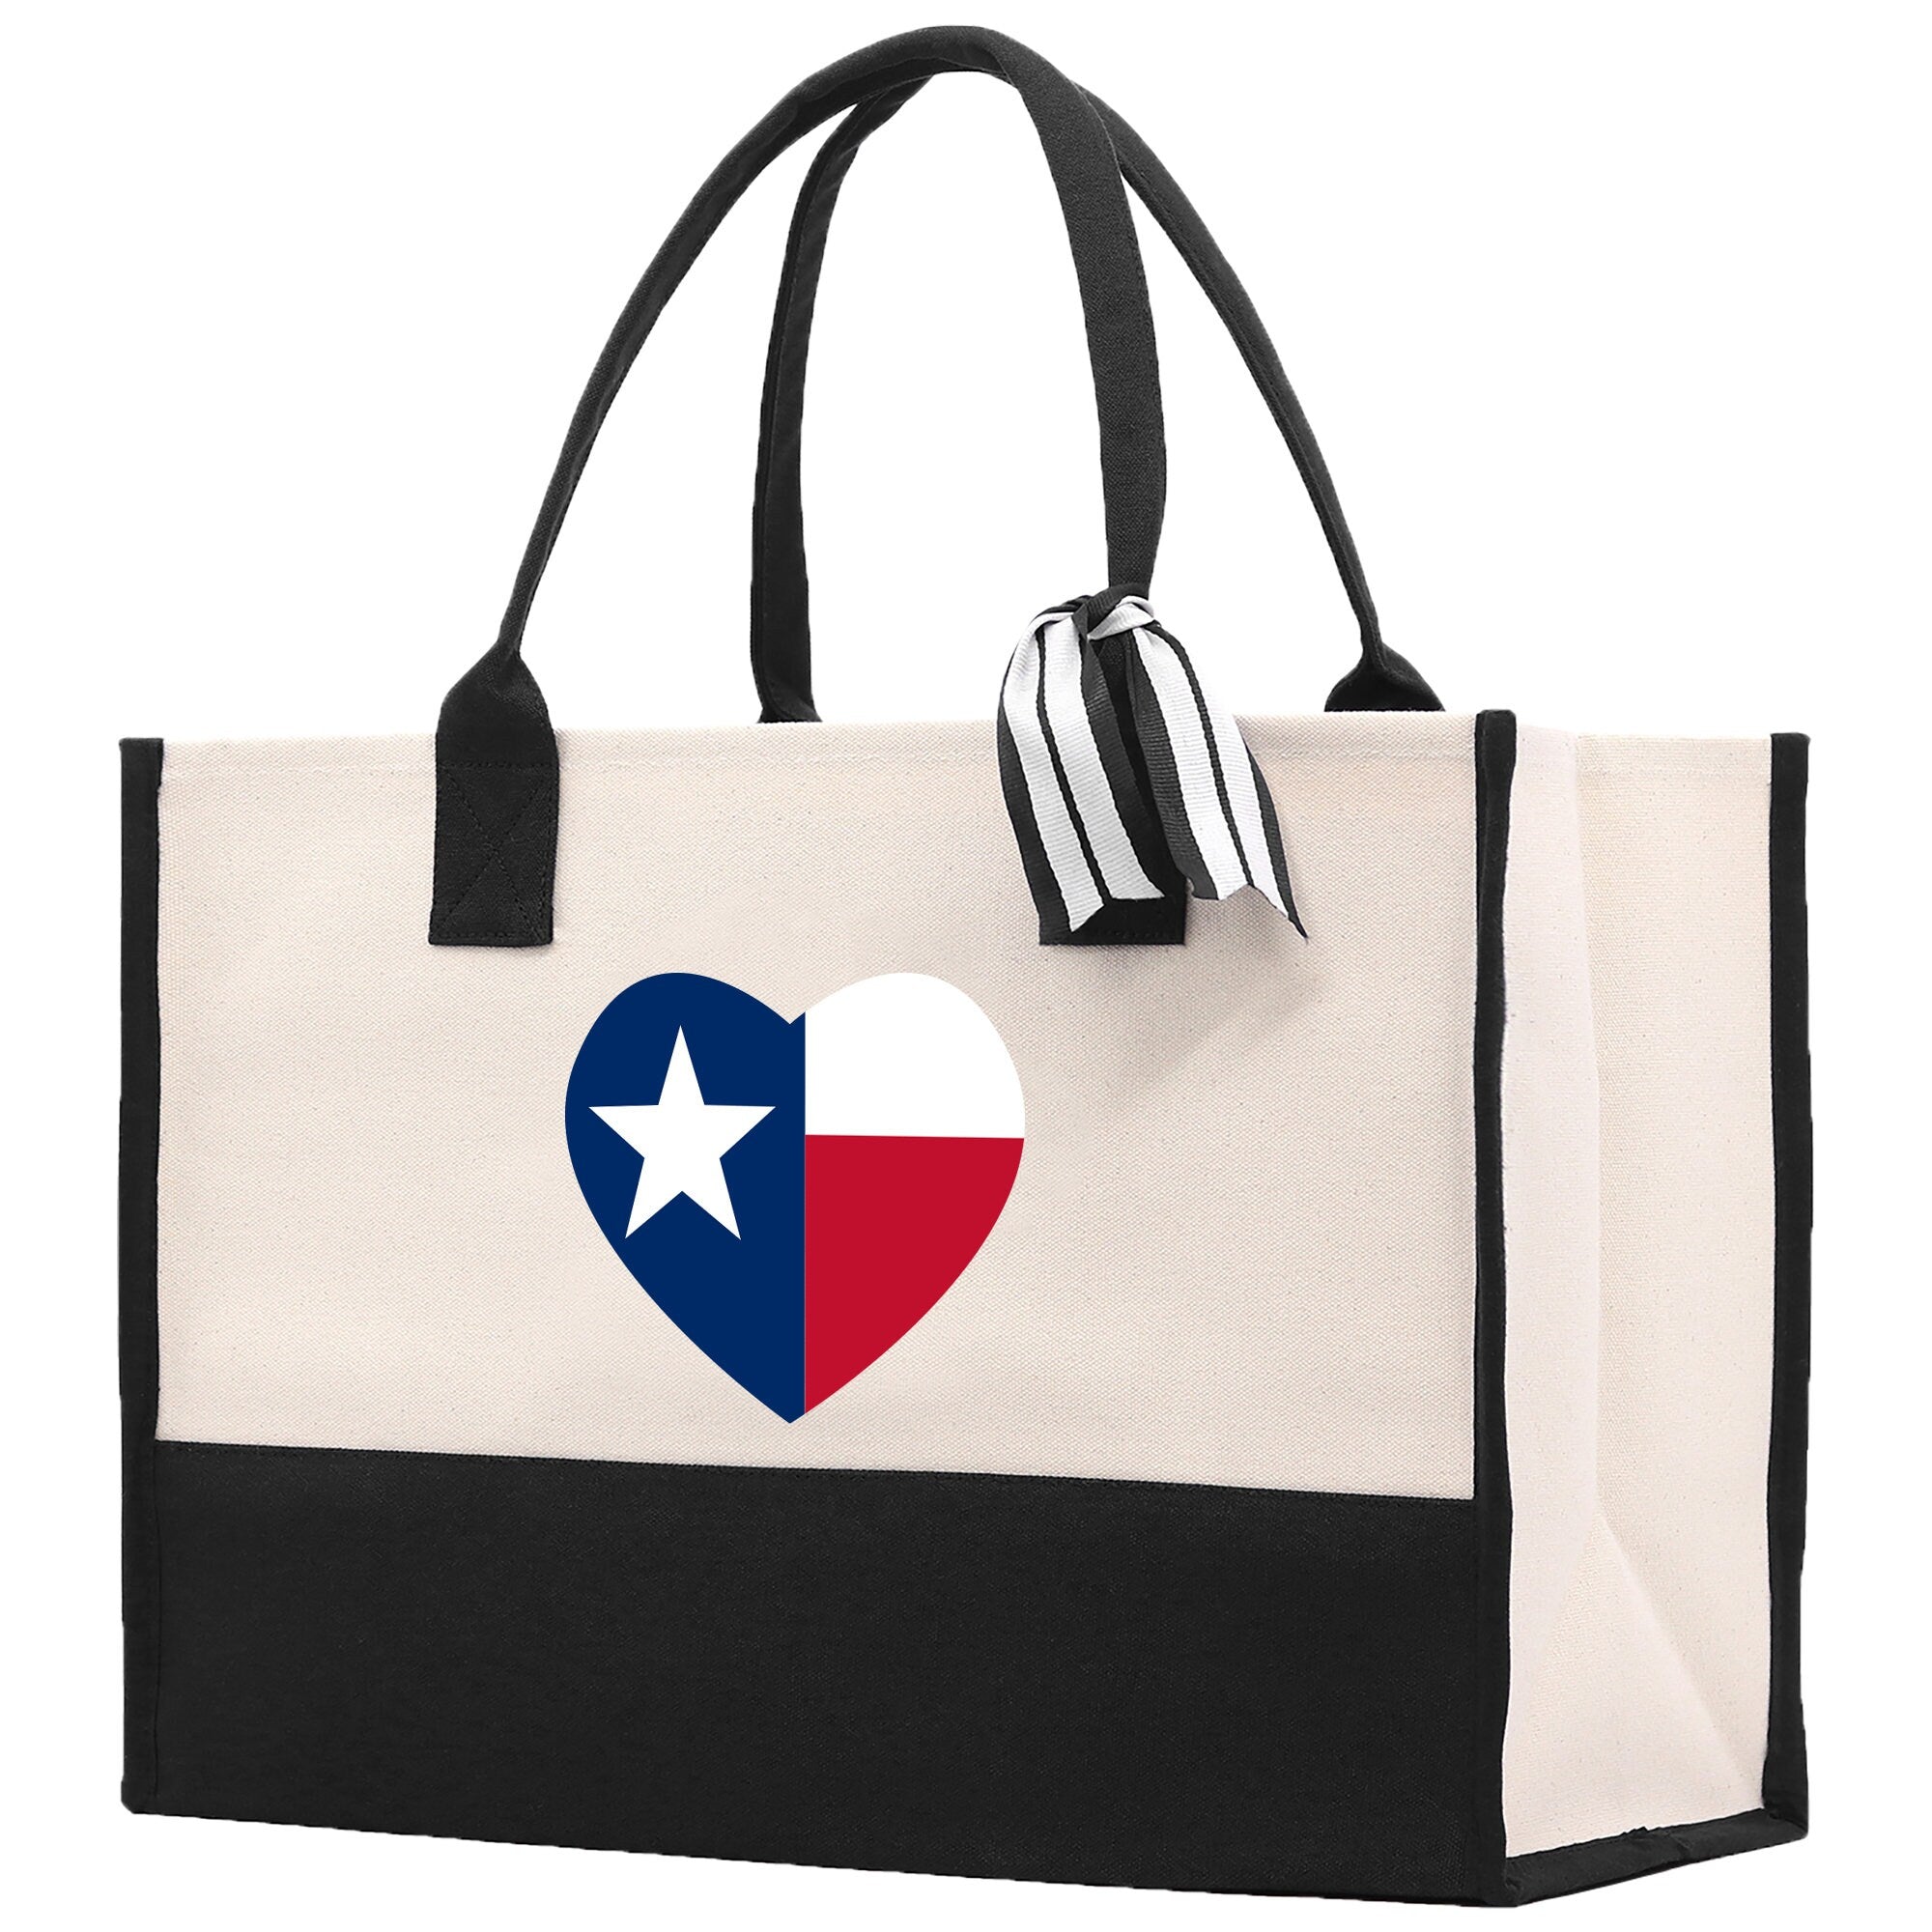 Texas Cotton Canvas Tote Bag TX Travel Vacation Tote Employee and Client Gift Wedding Favor Birthday Welcome Tote Bag Bridesmaid Gift